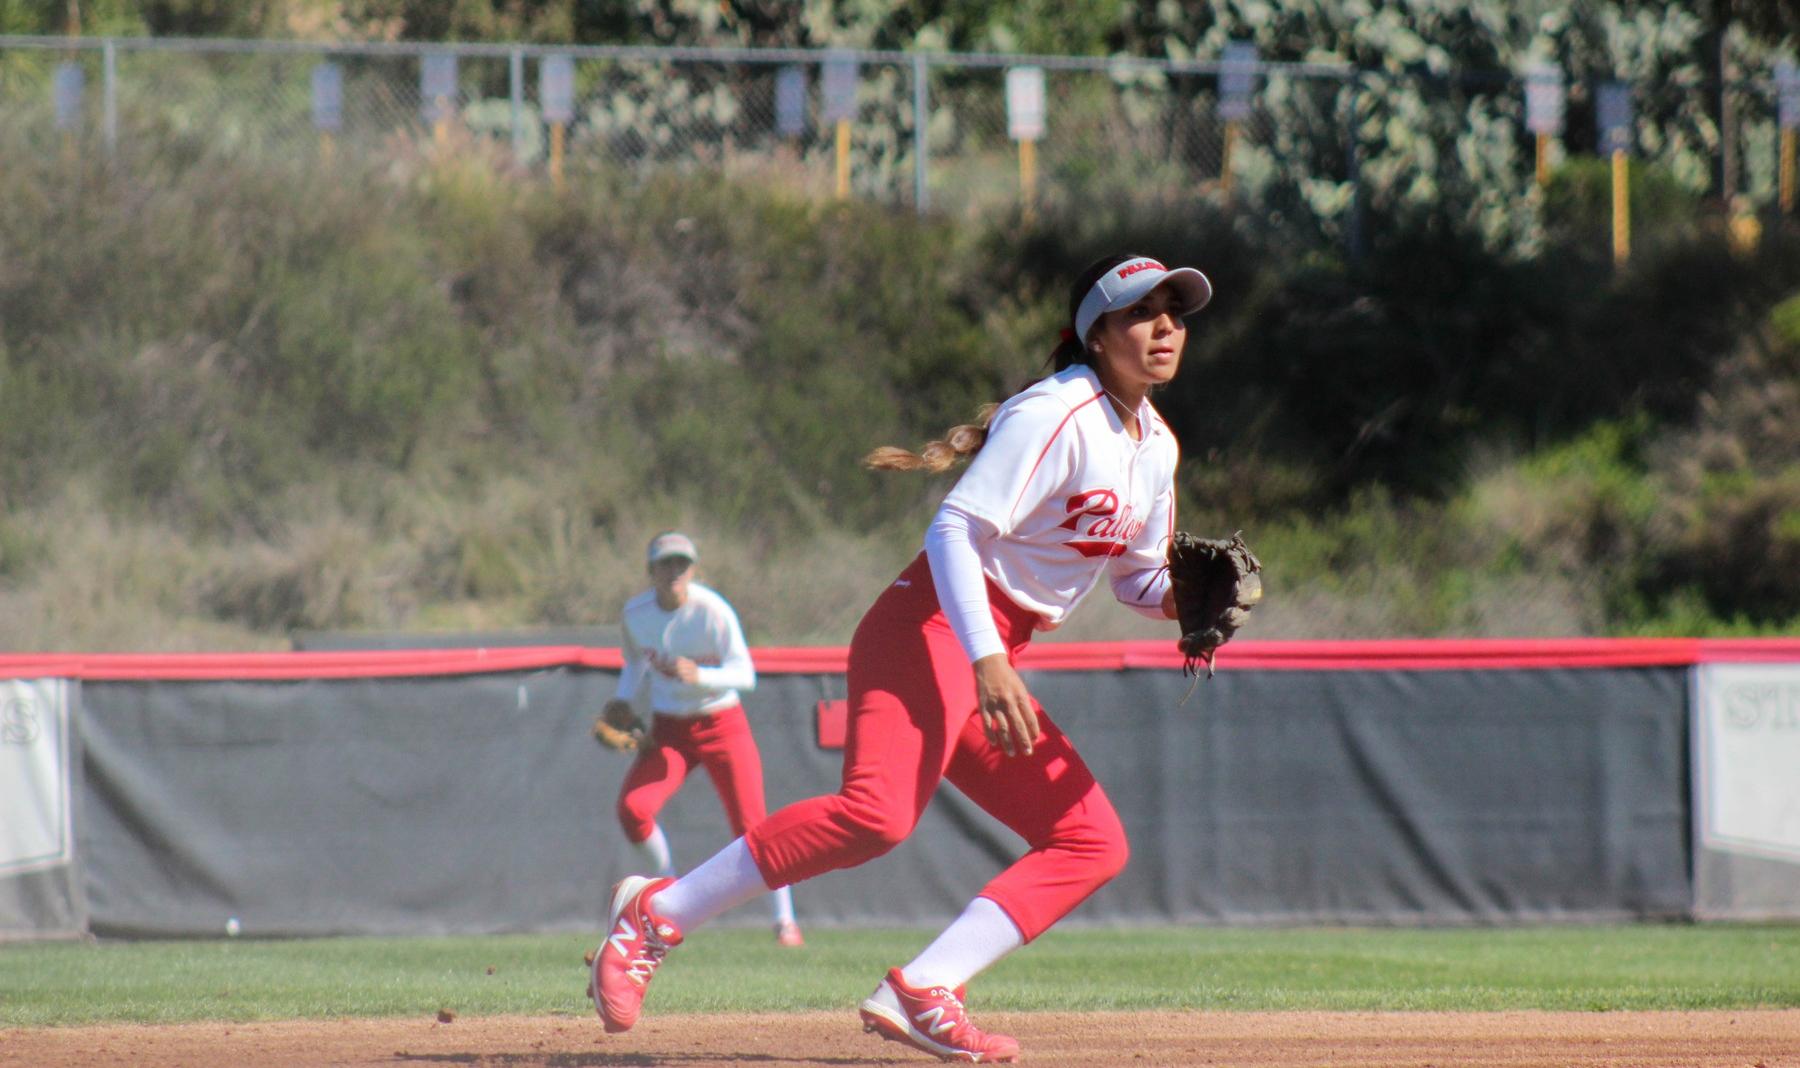 Samarah Martinez was perfect at the plate against Grossmont.